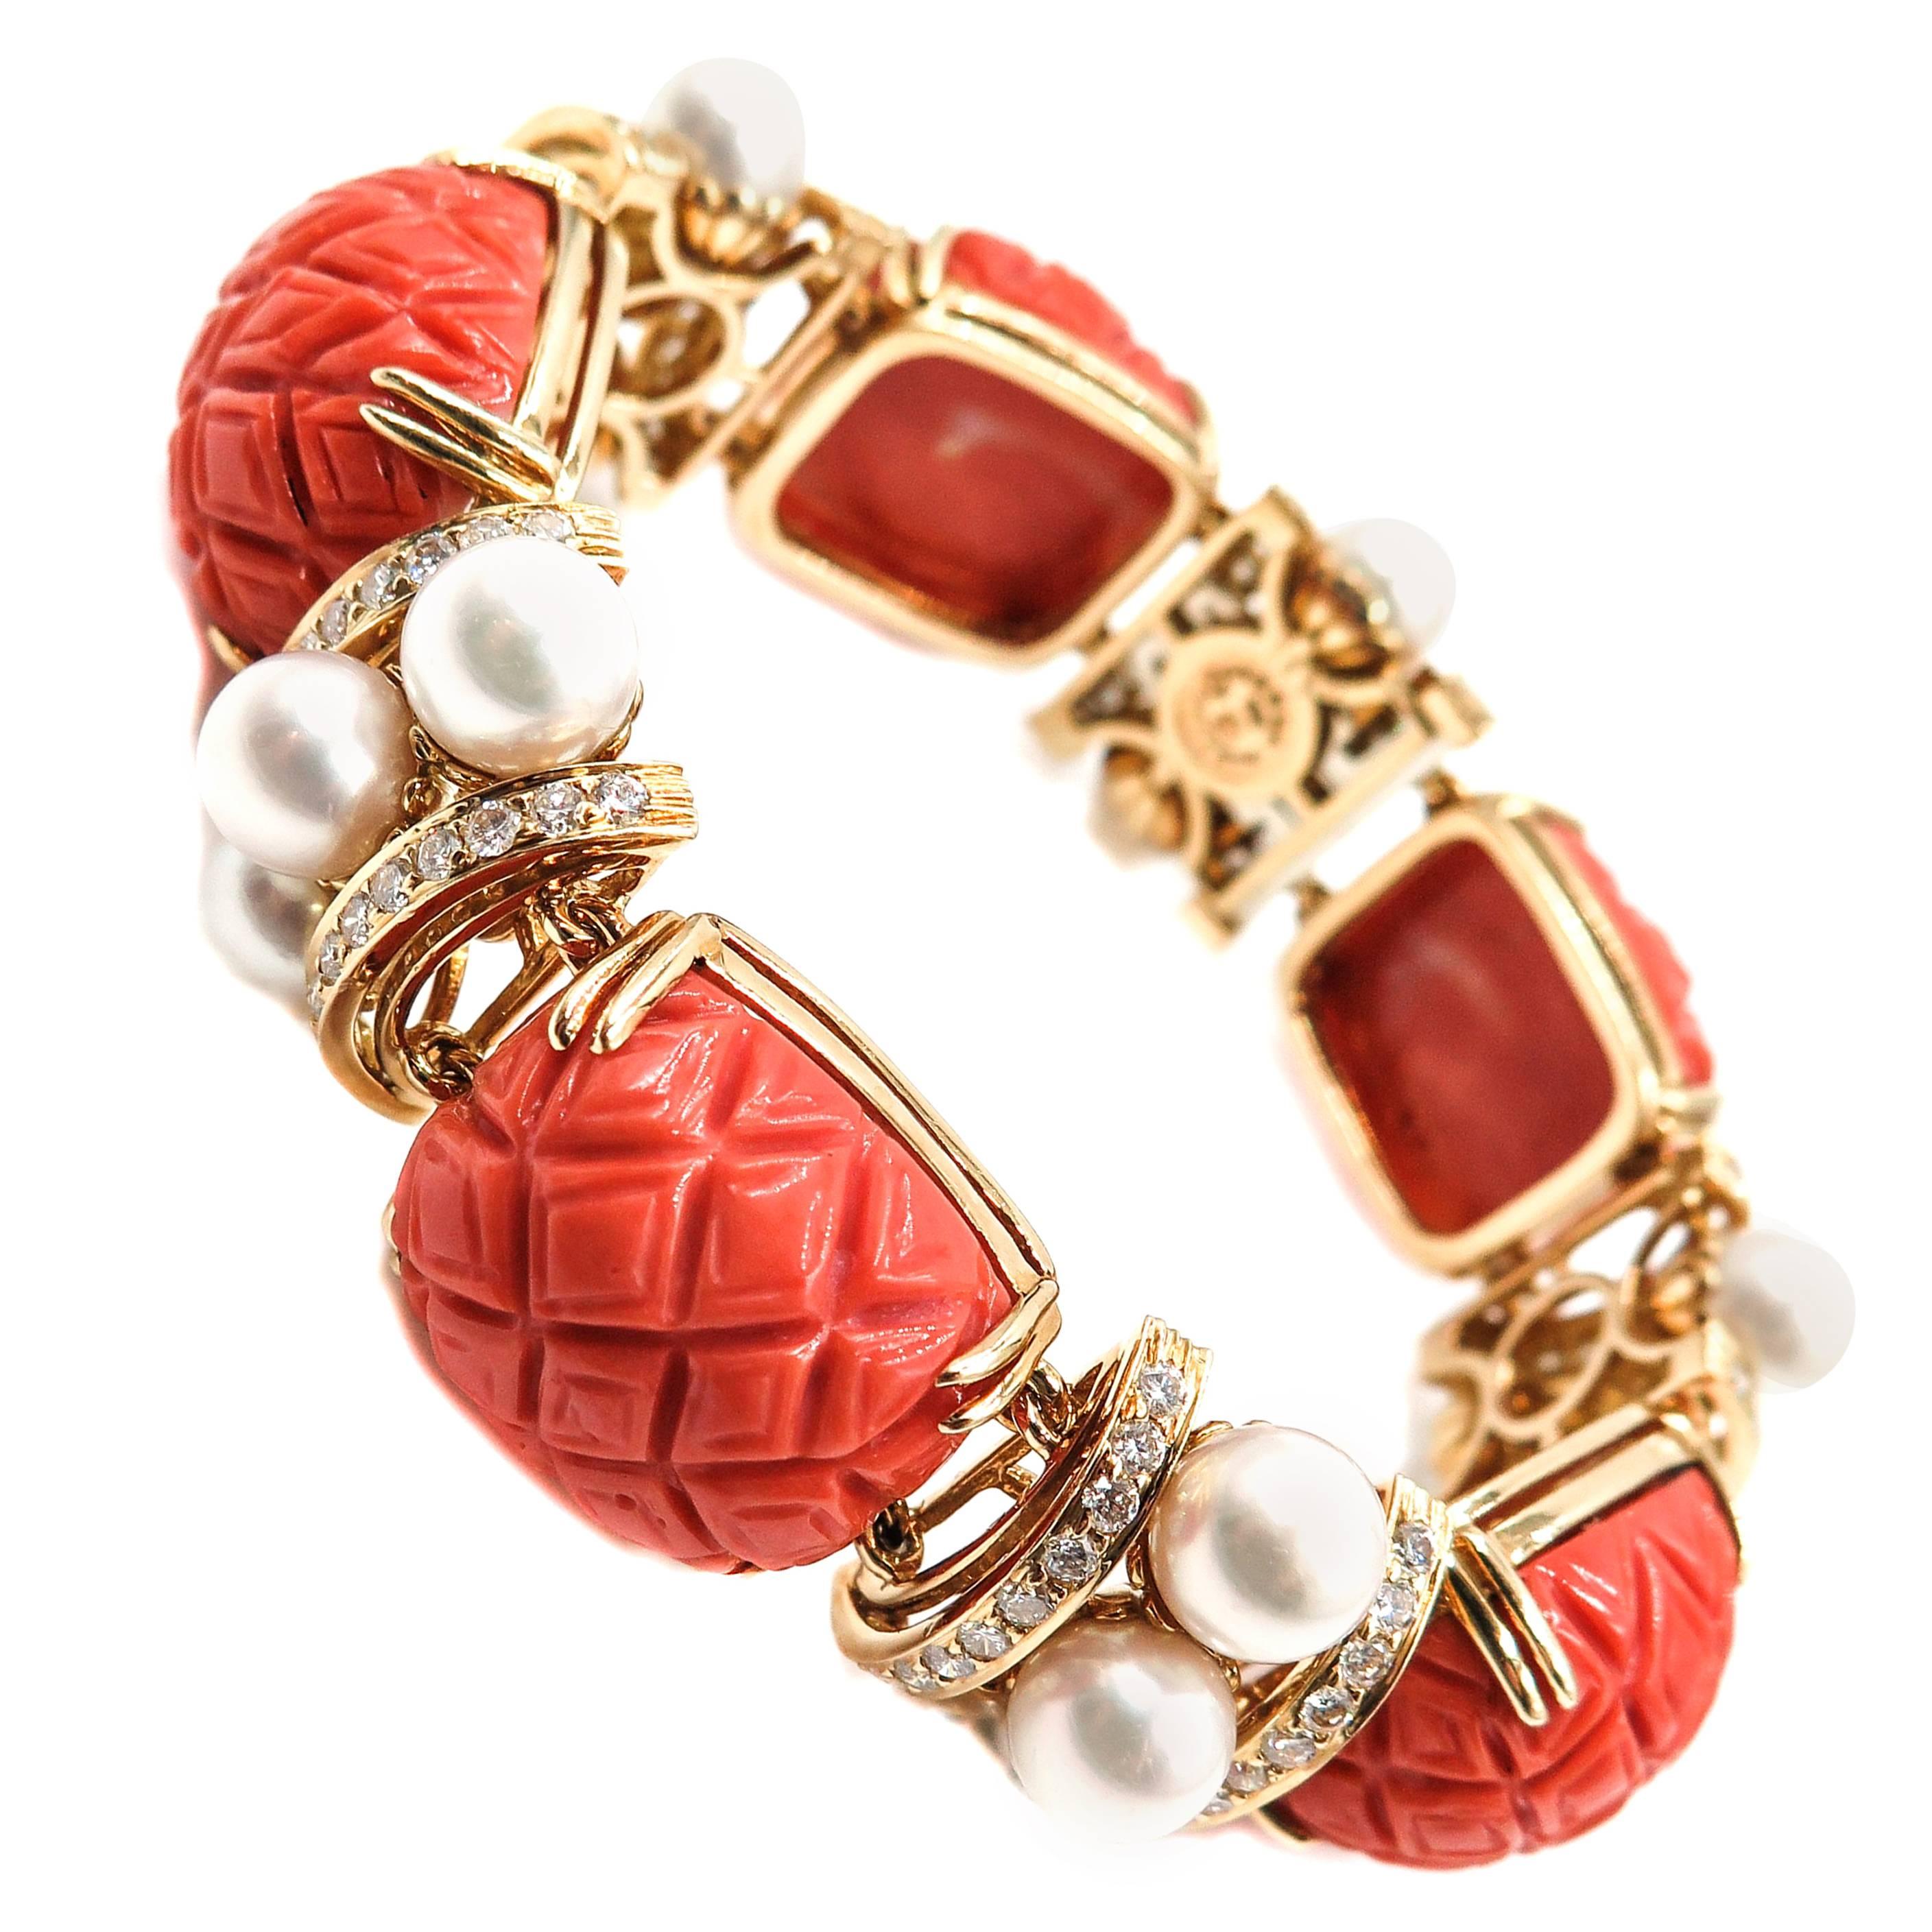 Carved Coral, Pearls and Diamond Bracelet by Seaman Schepps